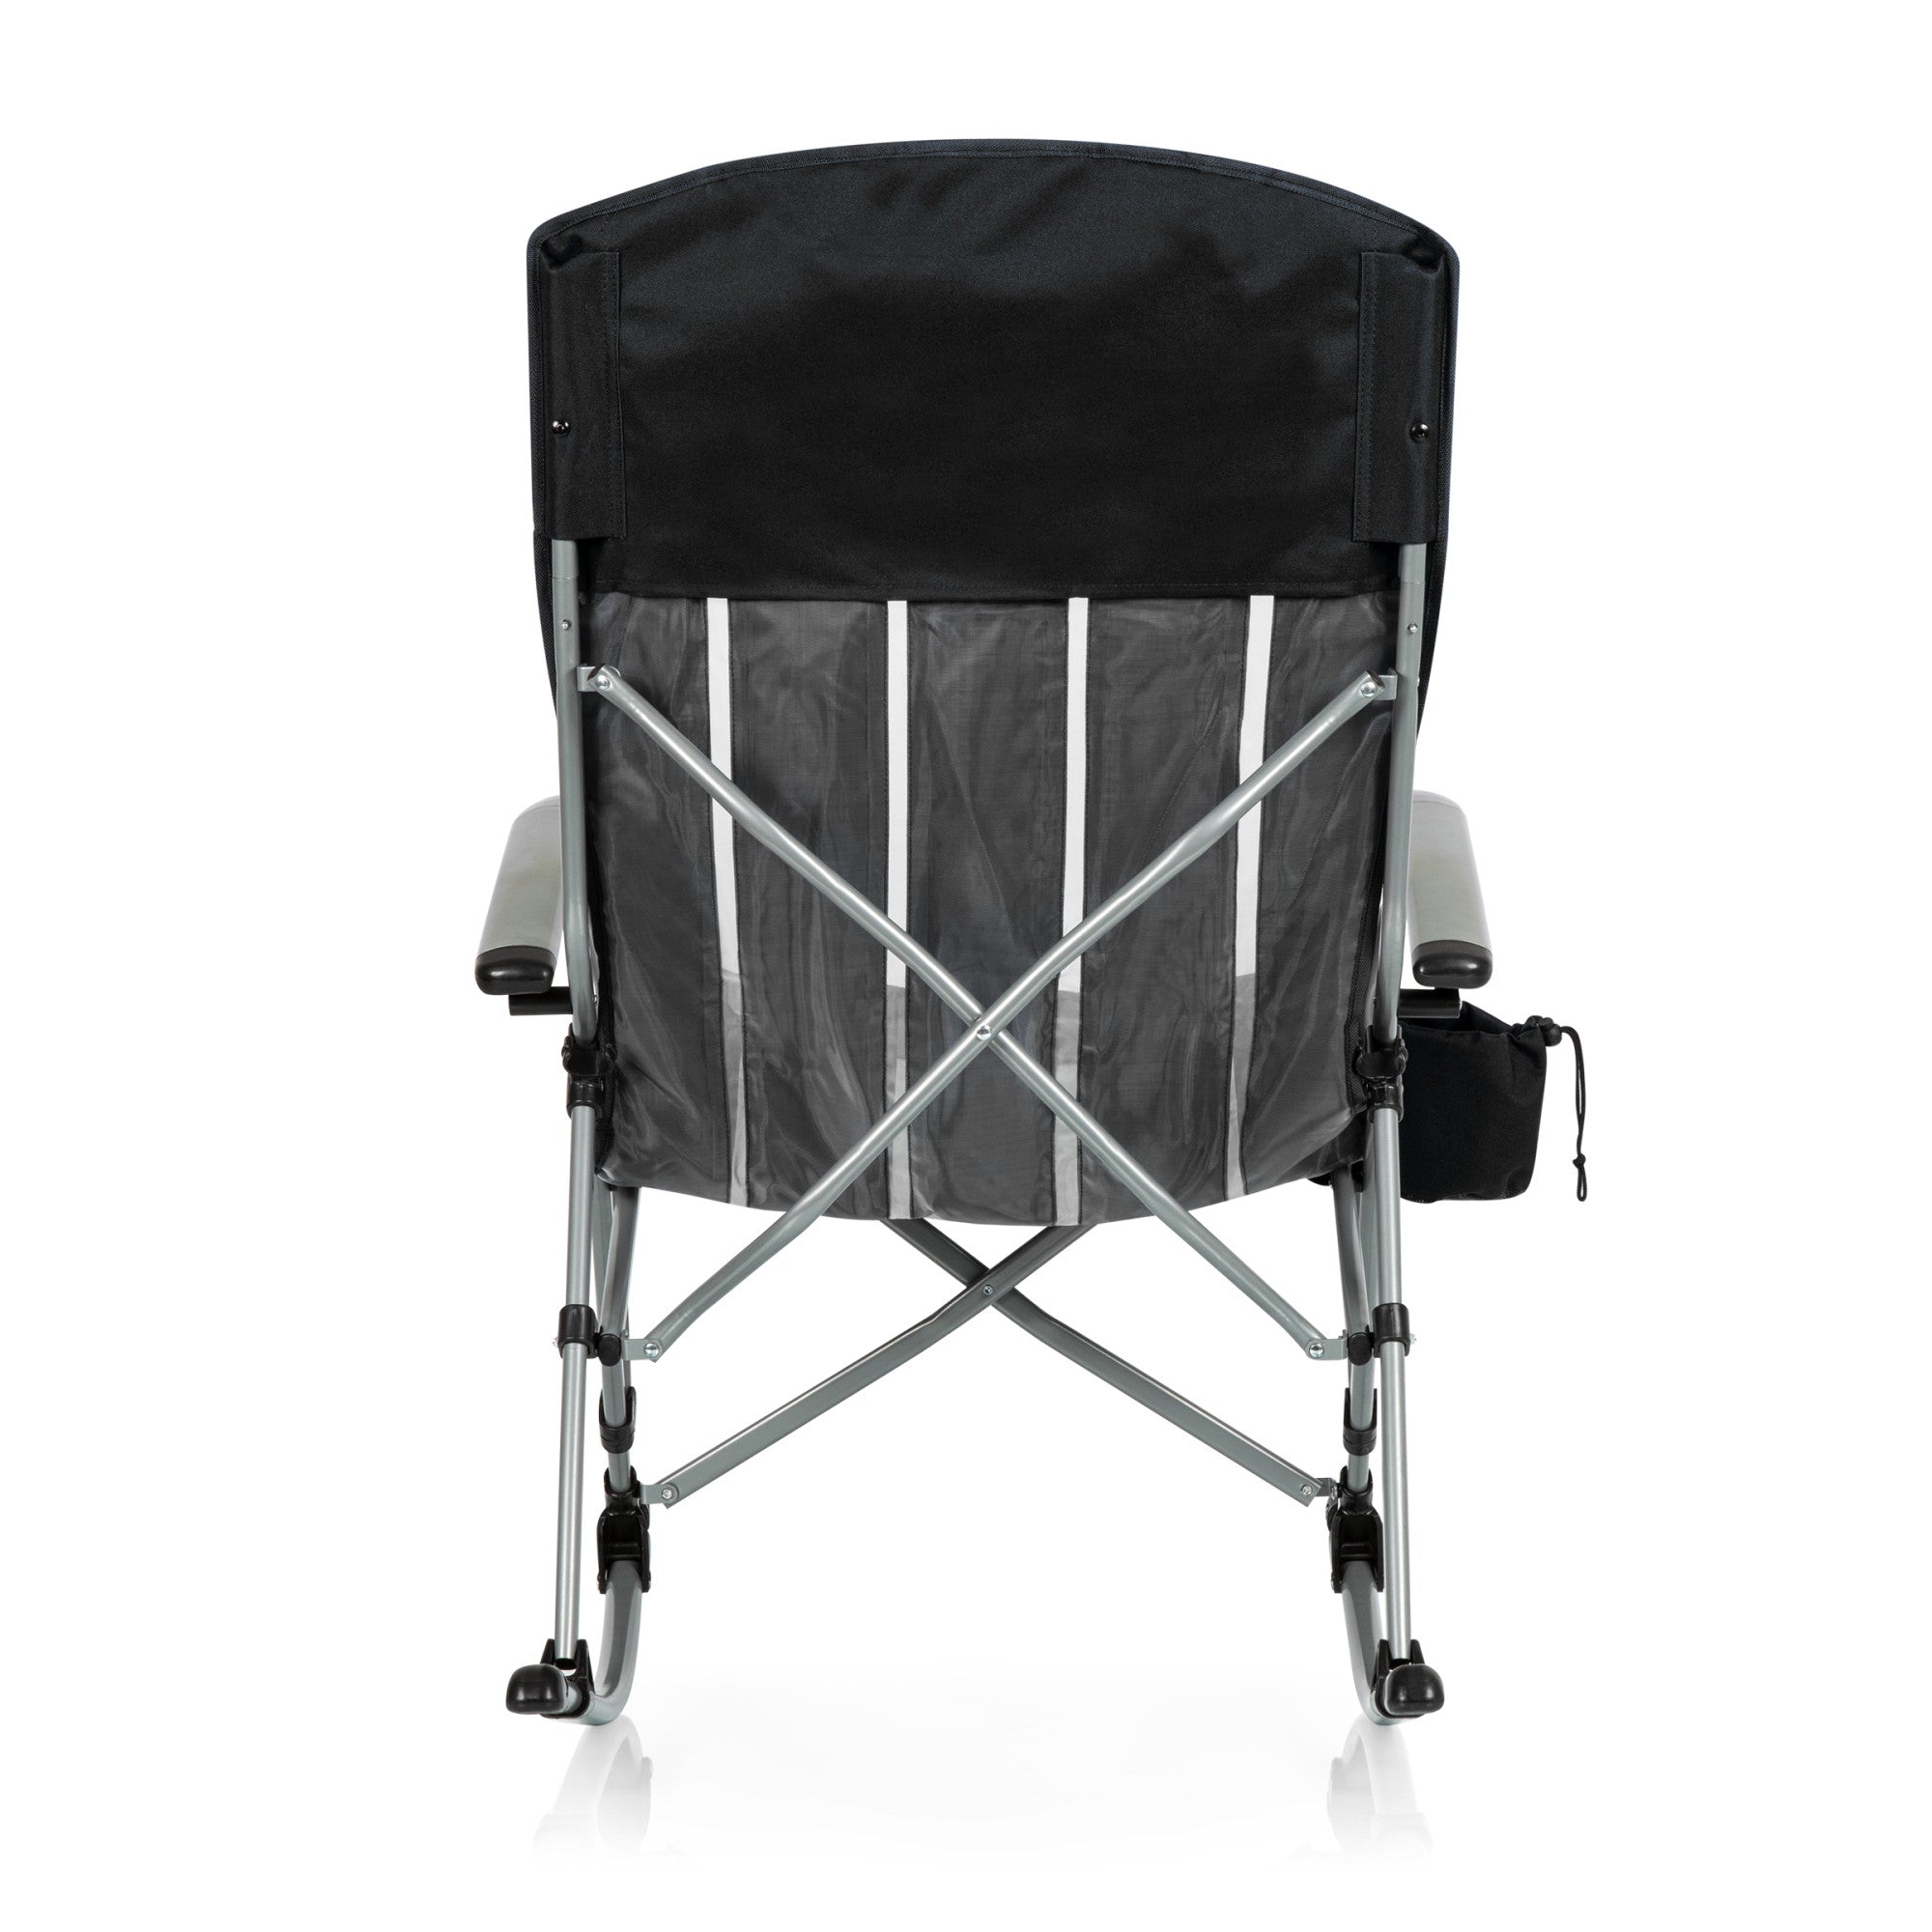 Los Angeles Dodgers - Outdoor Rocking Camp Chair